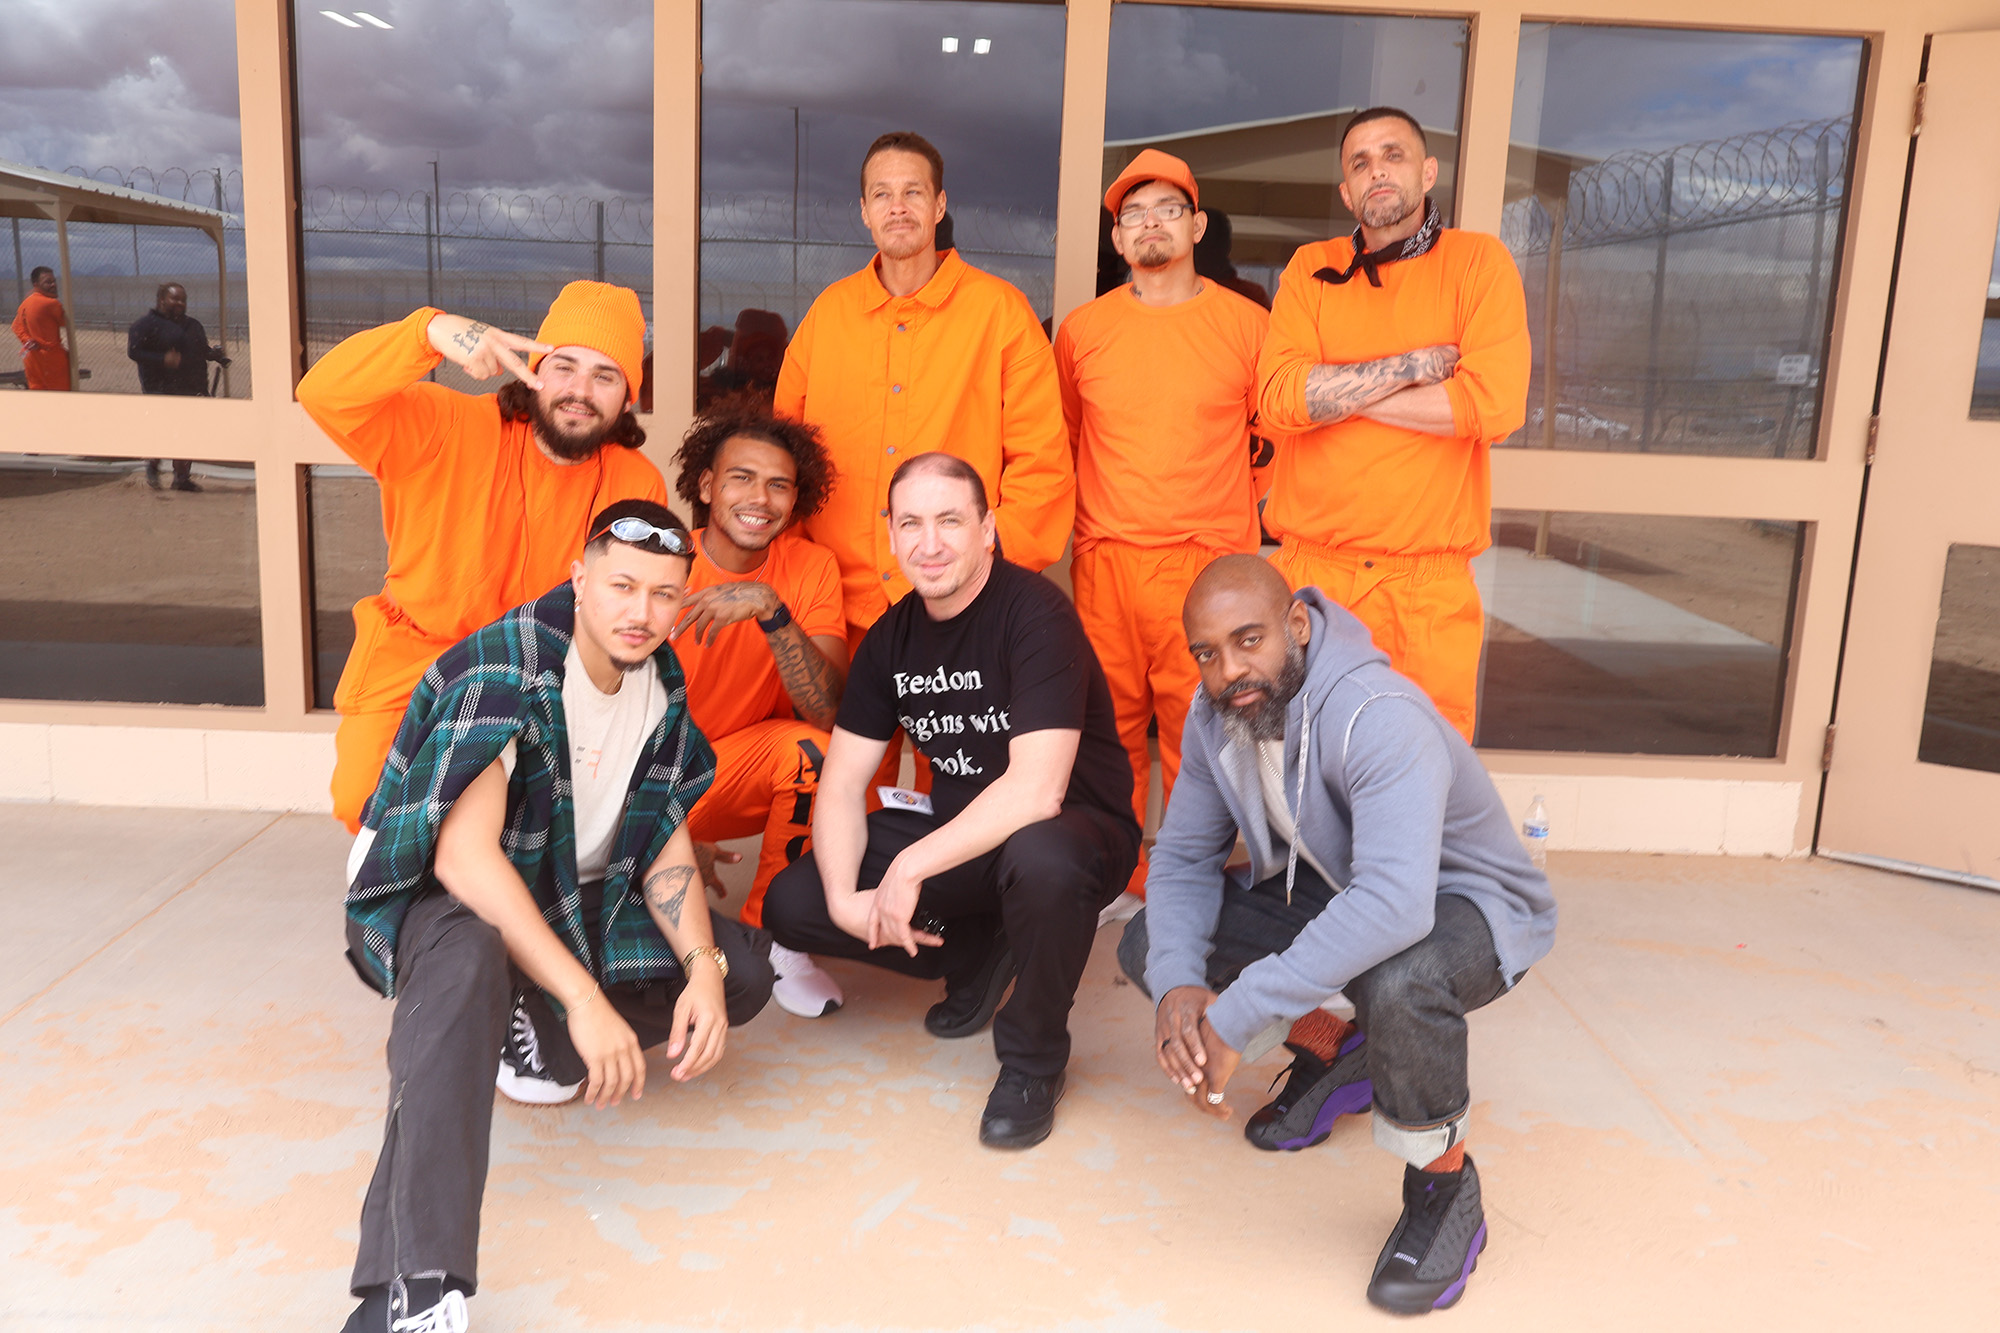 David (lower left), Freedom Reads Founder & CEO Reginald Dwayne Betts (lower right), and Freedom Reads Program Coordinator Steven Parkhurst (lower middle) with men at Arizona State Prison Complex - Yuma during the Inside Literary Prize tour.